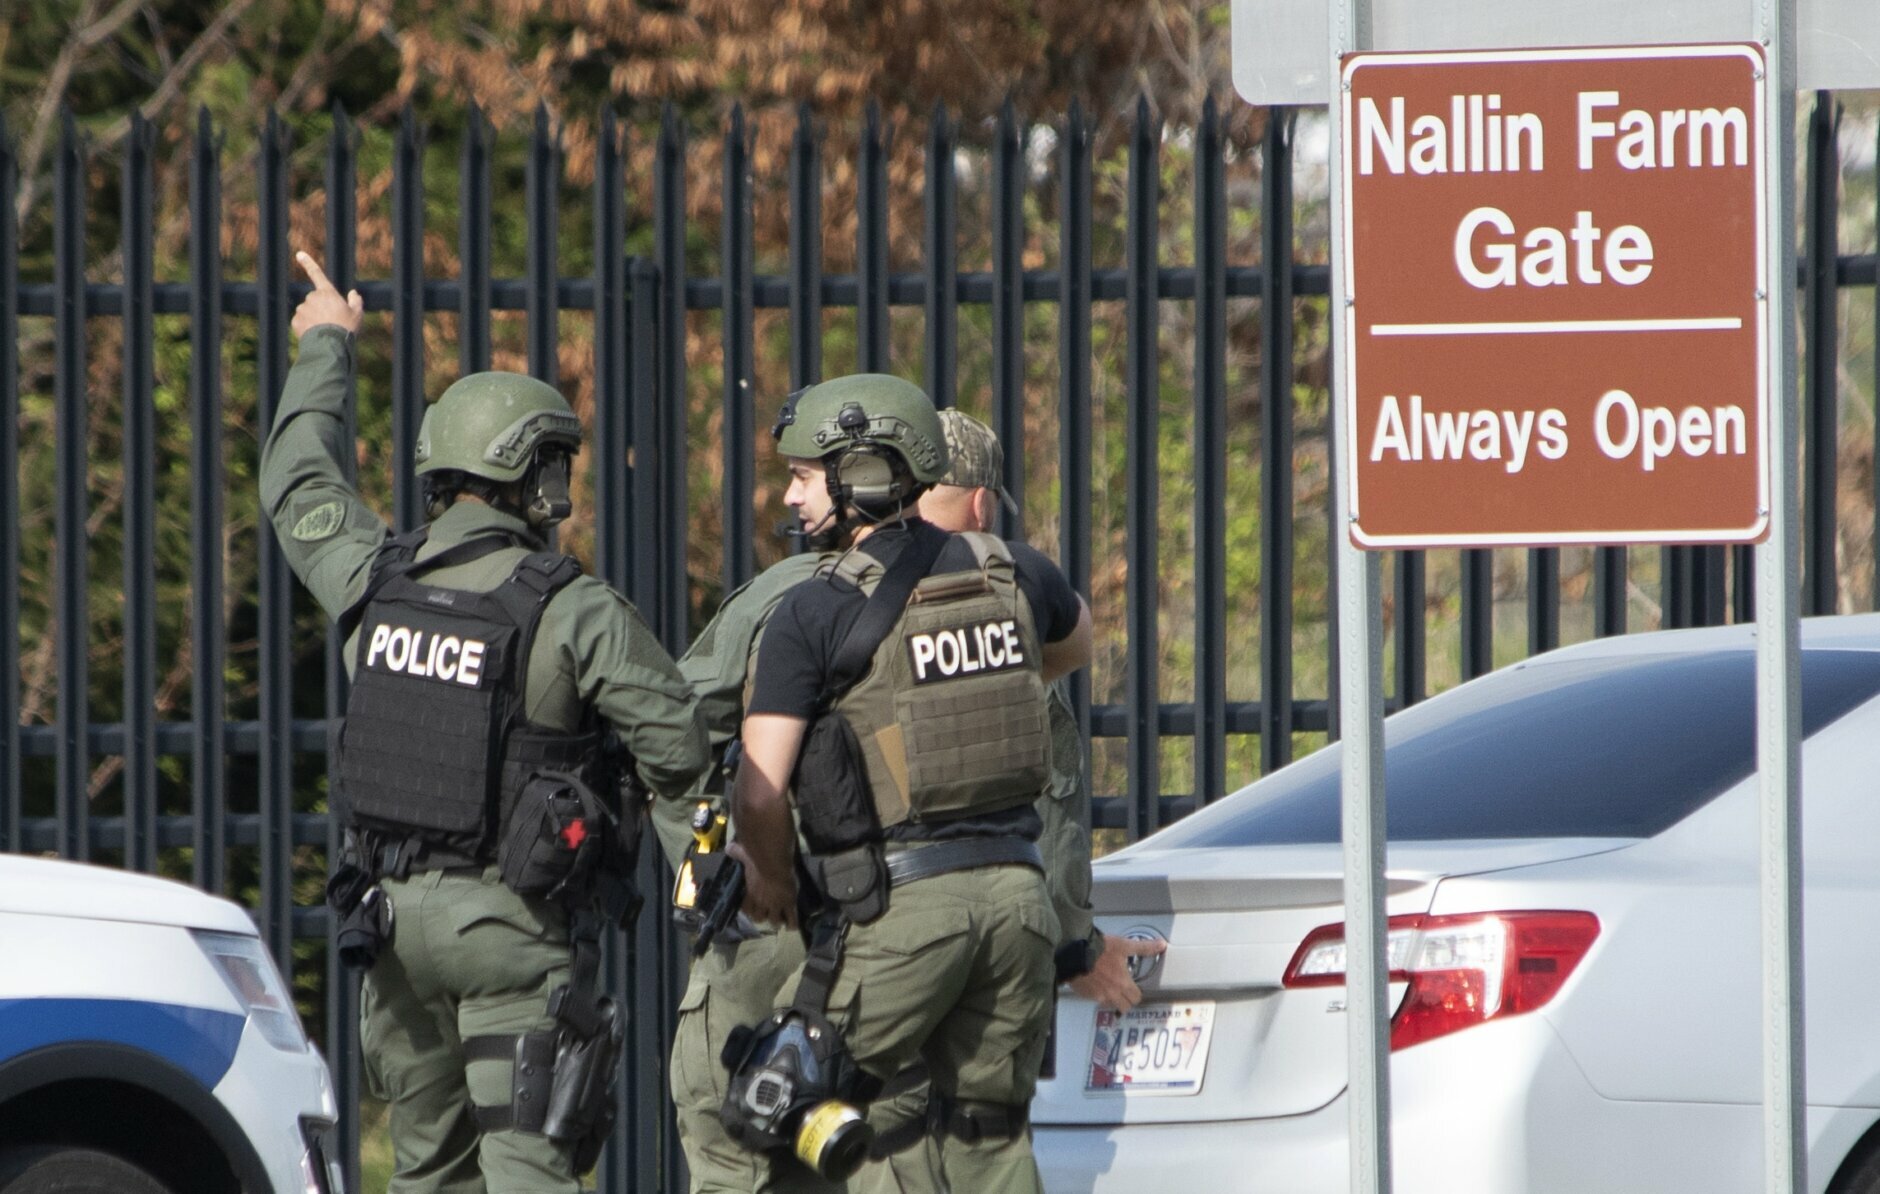 Members of the Frederick Police Department Special Response Team prepare to enter Fort Detrick at the Nallin Farm Gate in a convoy of vans and sedans following a shooting in Riverside Tech Park, near the Royal Farms on Monocacy Boulevard, Tuesday, April 6, 2021, in northeast Frederick, Md. Authorities say a Navy medic shot and critically wounded two people at a Maryland business park before fleeing to the Fort Detrick Army base, where he was shot and killed. (Graham Cullen/The Frederick News-Post via AP)